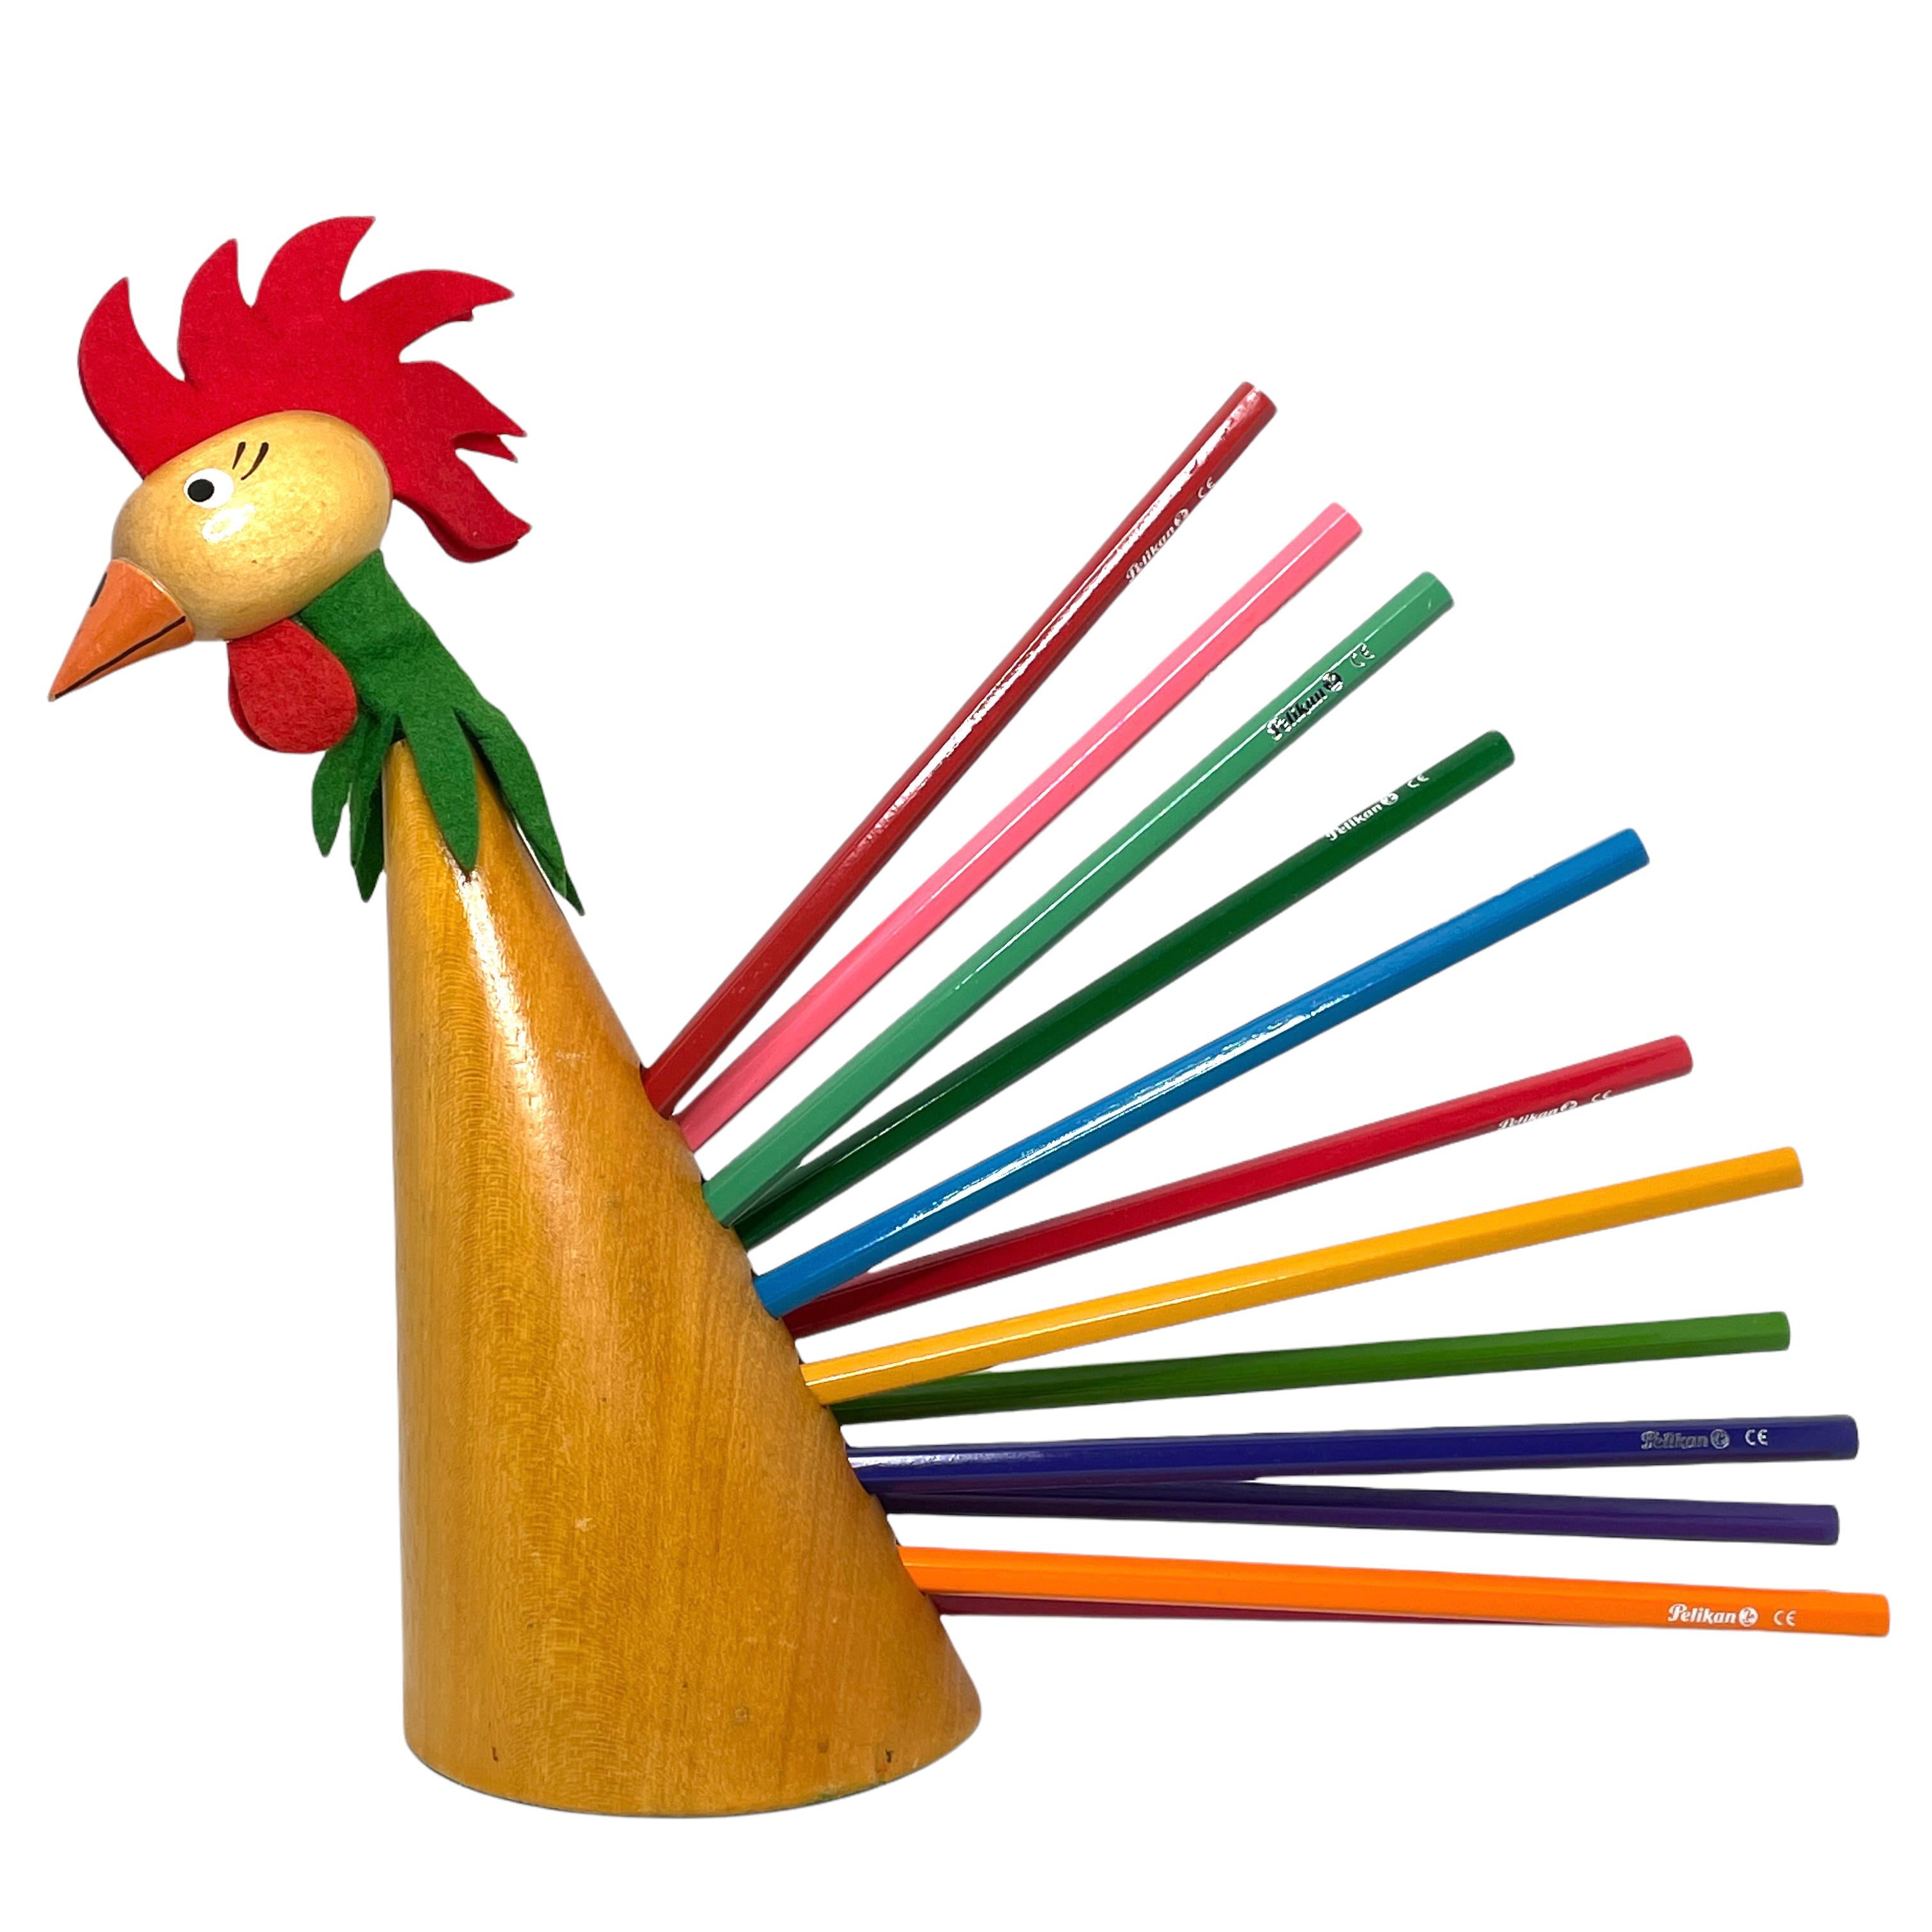 Classic early 1960s Danish design wood rooster sculpture as a pencil holder. Nice addition to your table or just for your collection of design items. Made of wood. Found at an estate sale in Vienna, Austria. Pencils shown in the picture are not